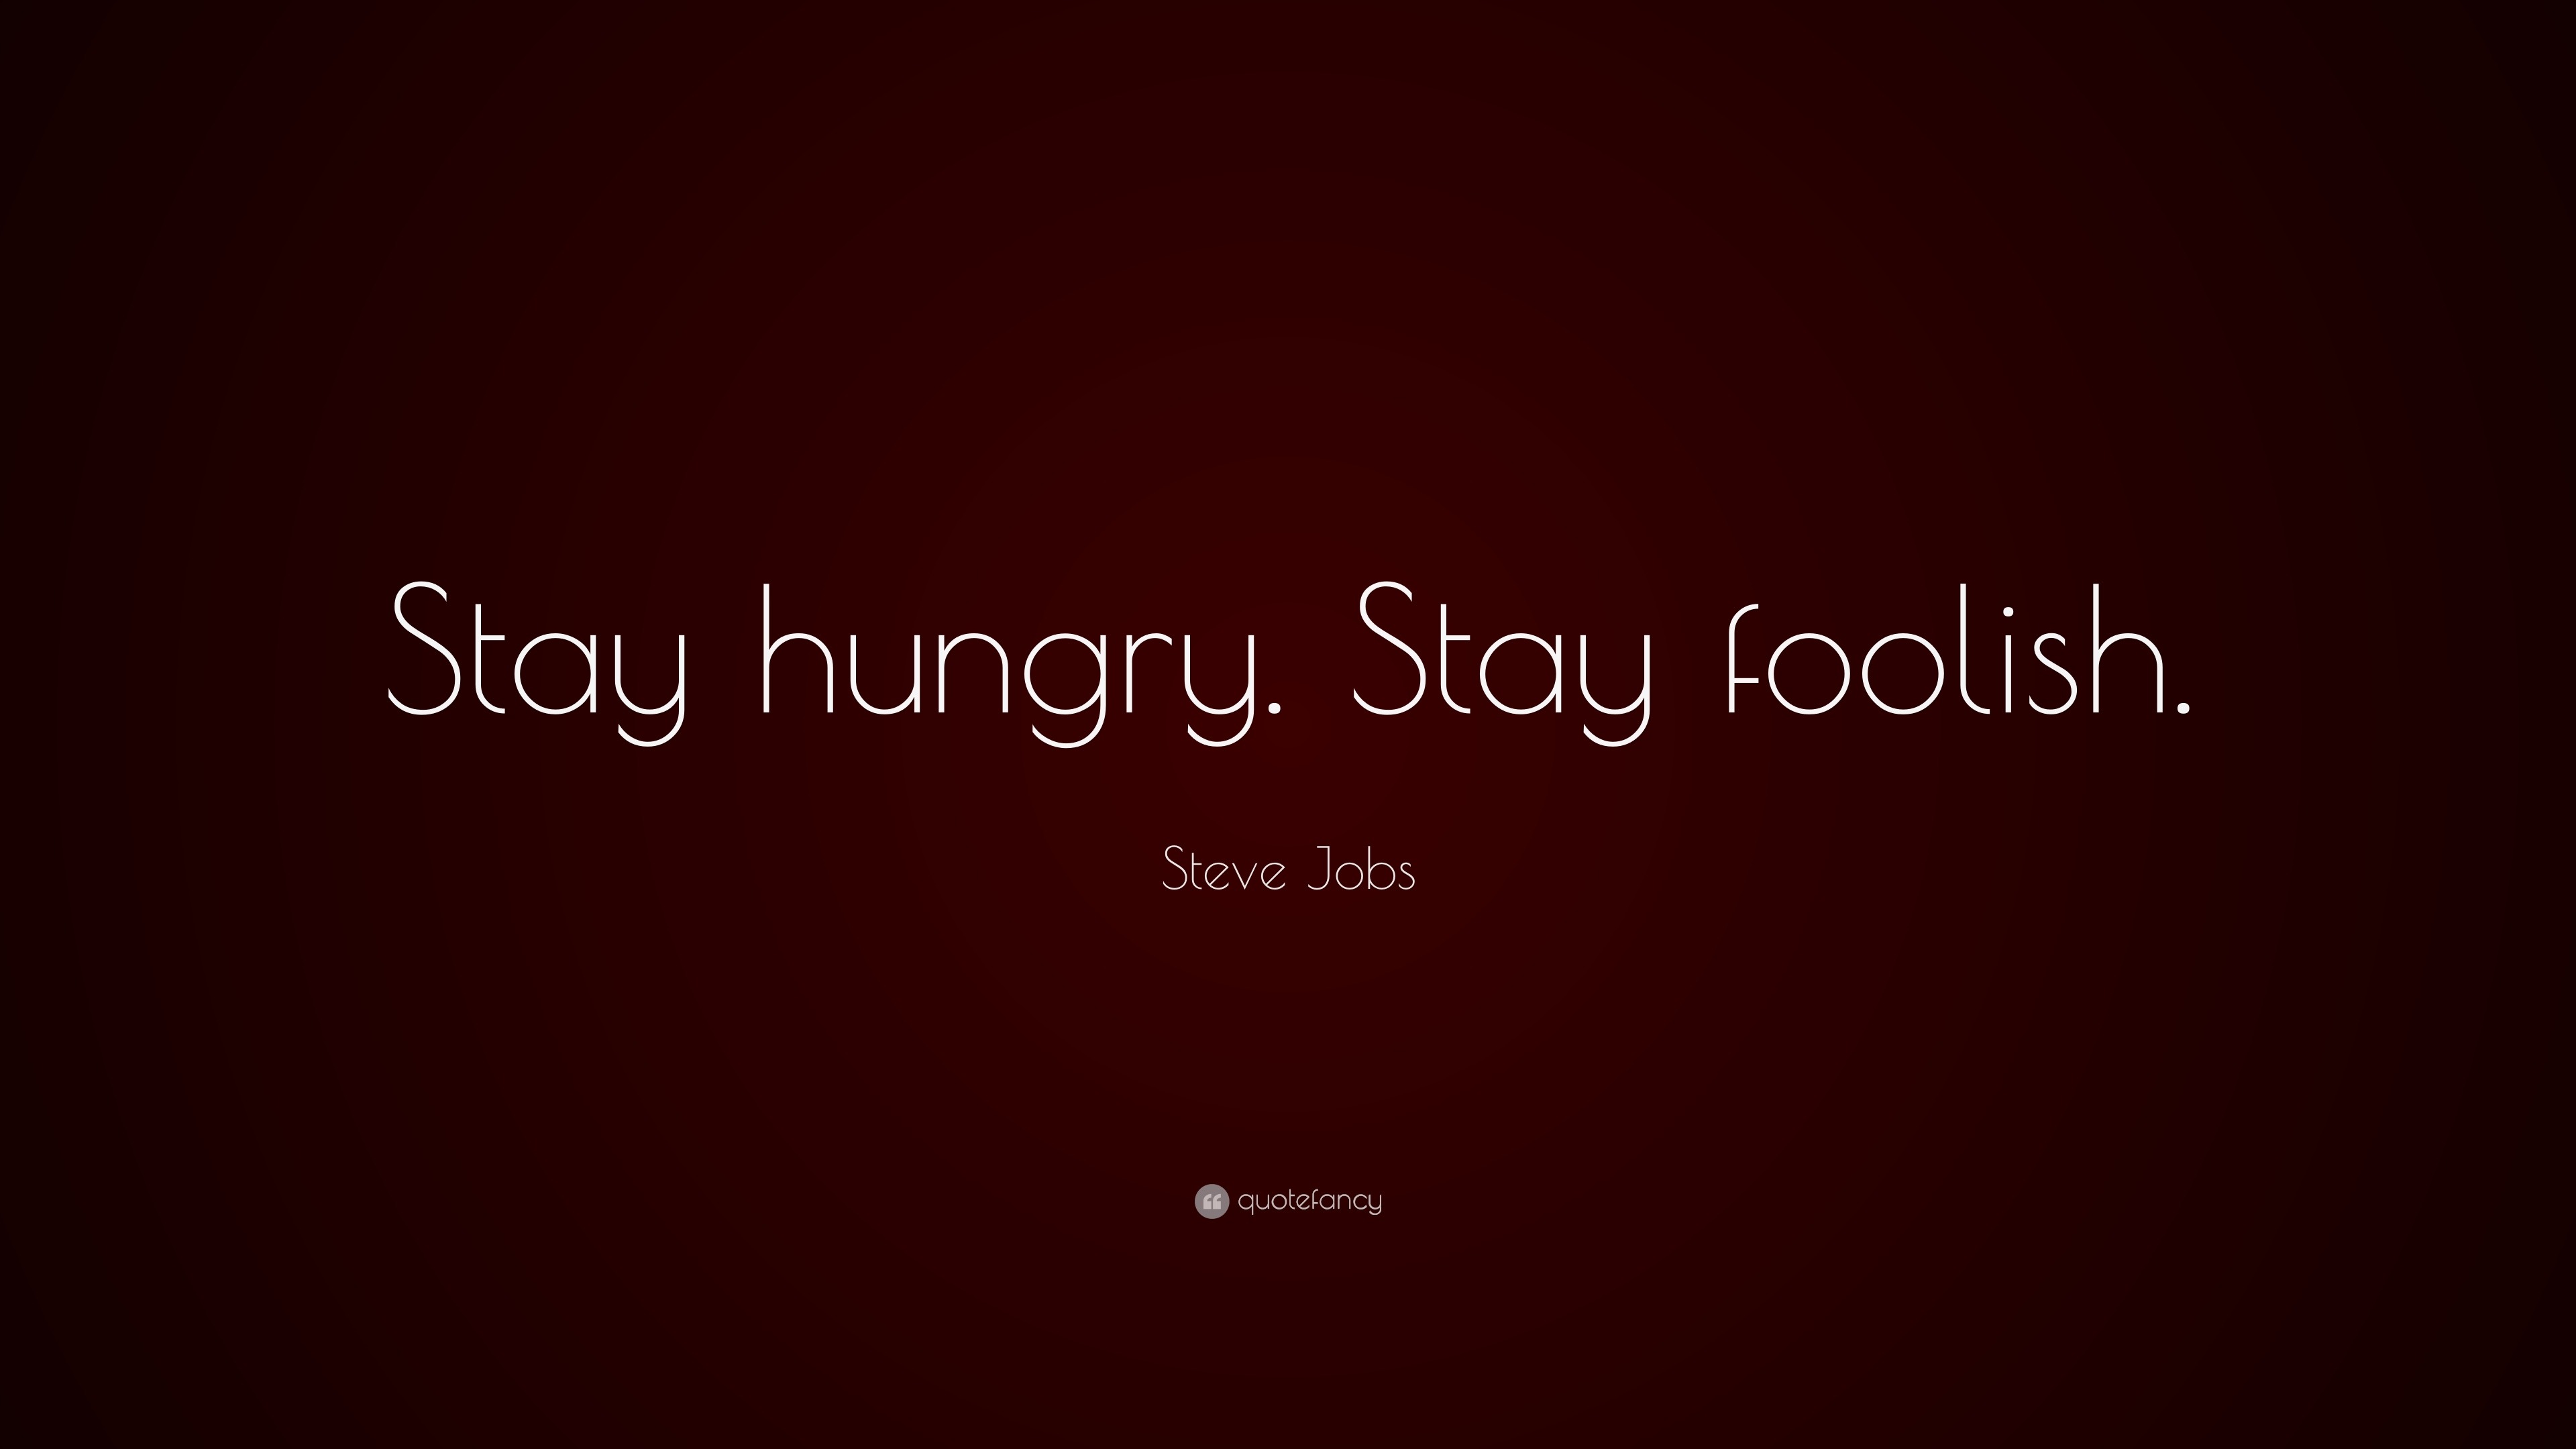 "stay hungry. stay foolish.